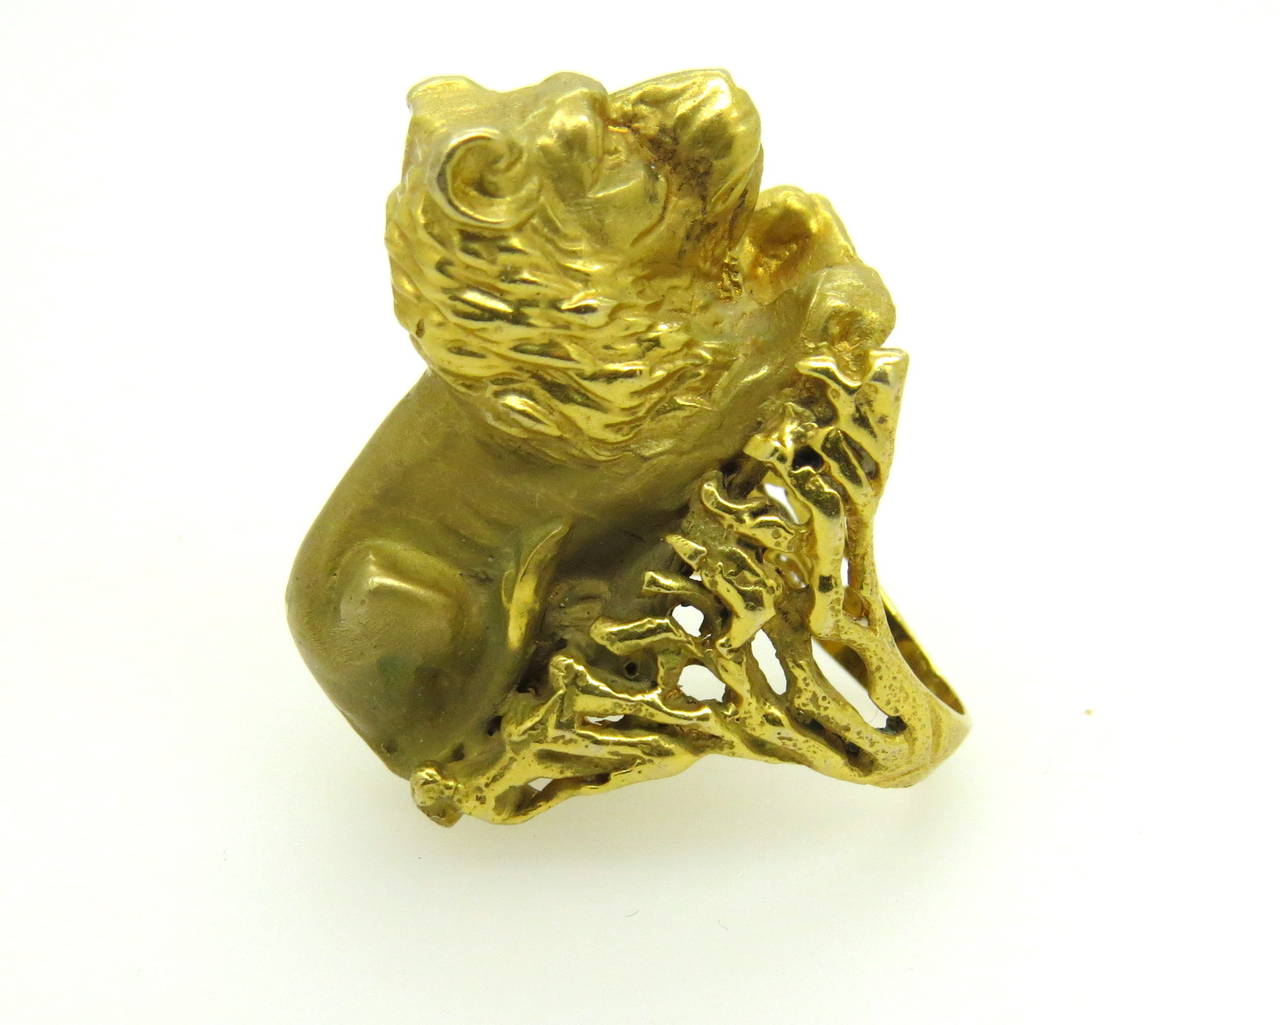 Massive 14k gold ring with lion top by Eric De Kolb . Ring size 8 1/2, ring top is 36mm x 22mm, ring sits approx. 22mm from the top of the finger. Marked Eric De Kolb and 14k. weight of the piece - 36.4 gr